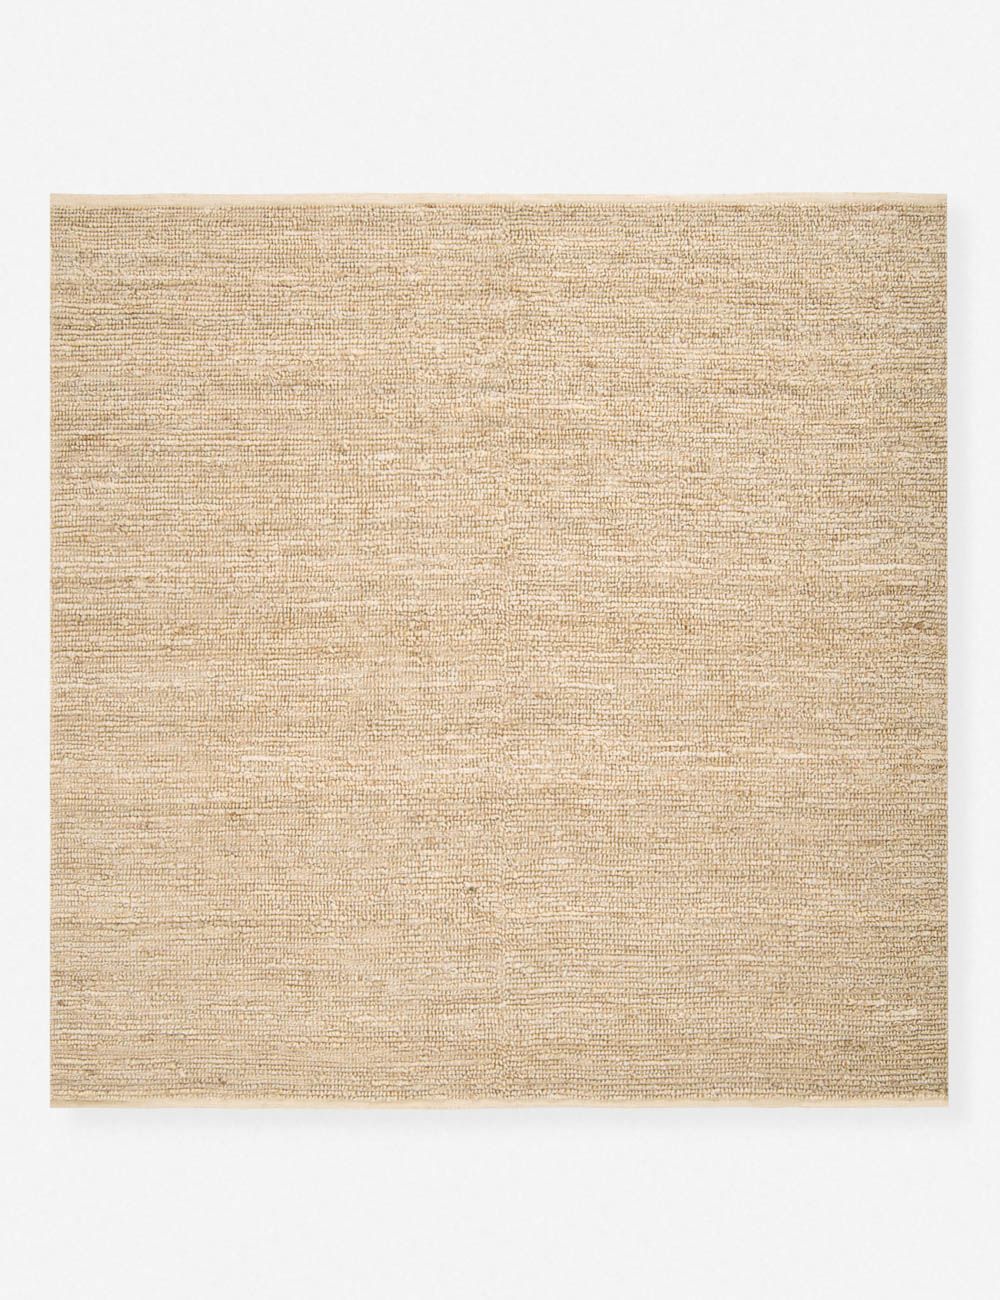 Handwoven Earthy Tone Solid Jute 8' Square Area Rug